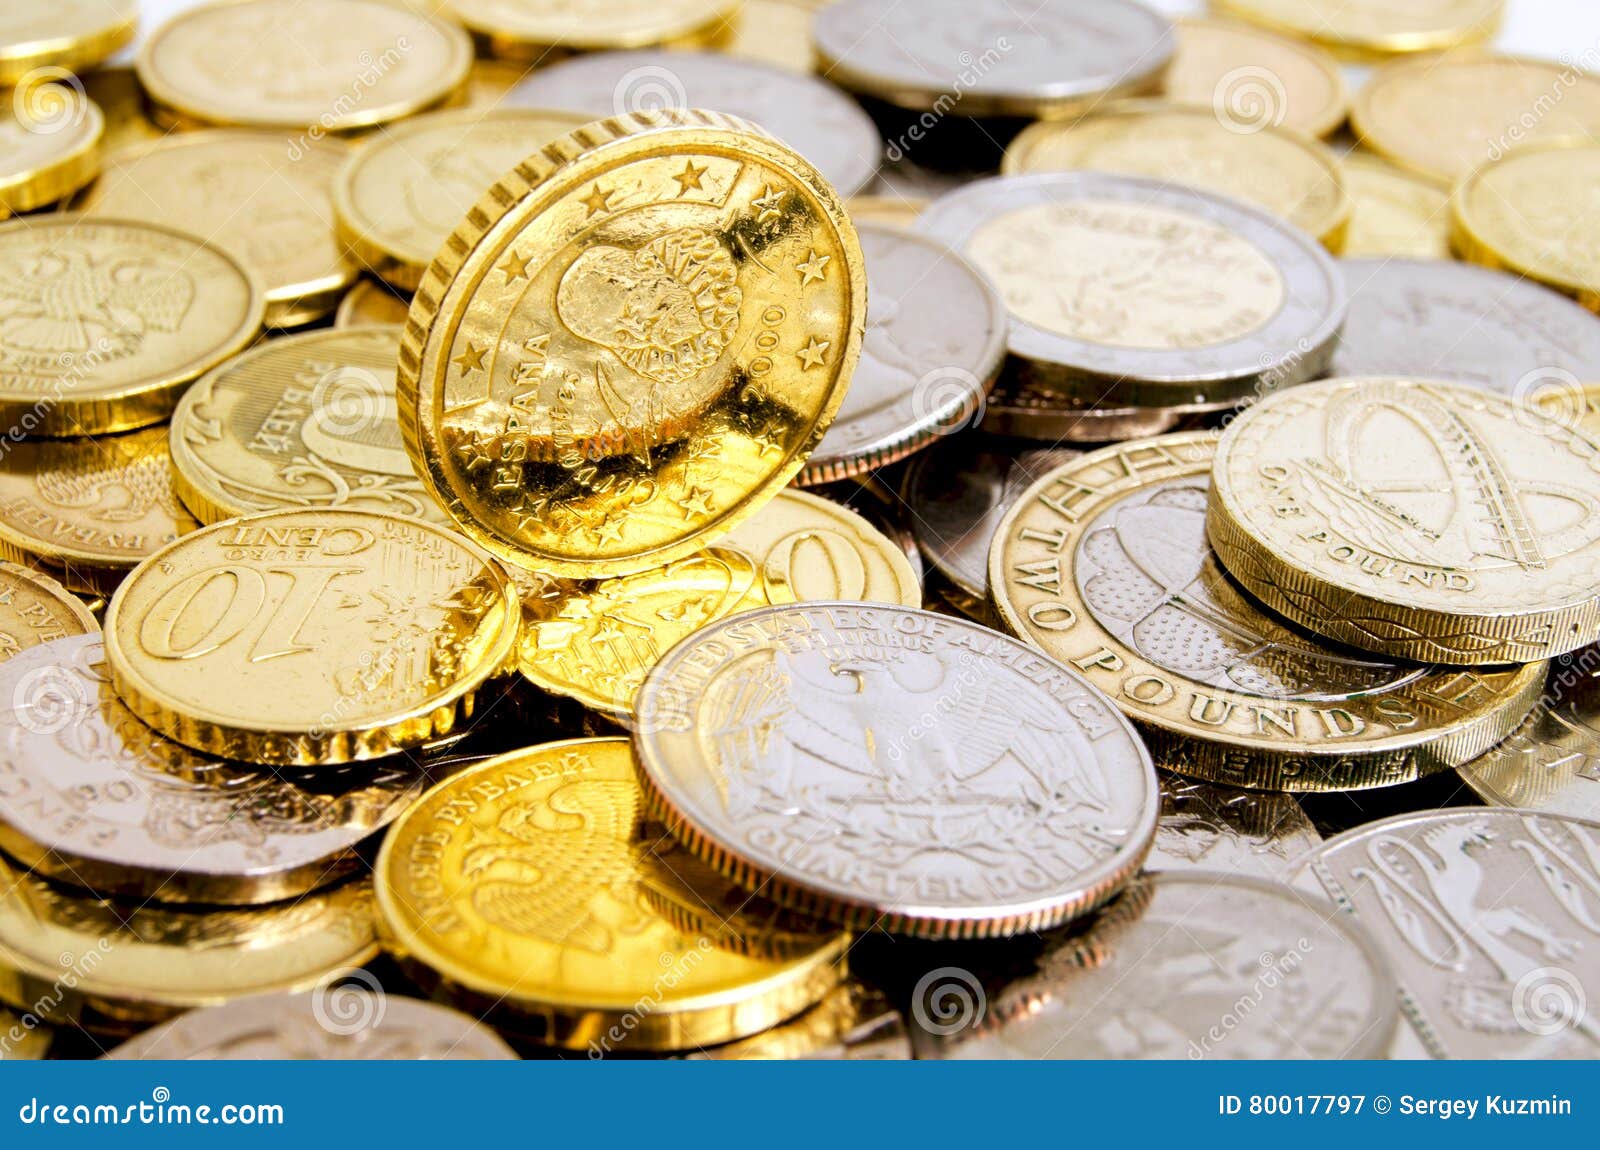 Coins On A Light Background. Stock Image - Image of ...